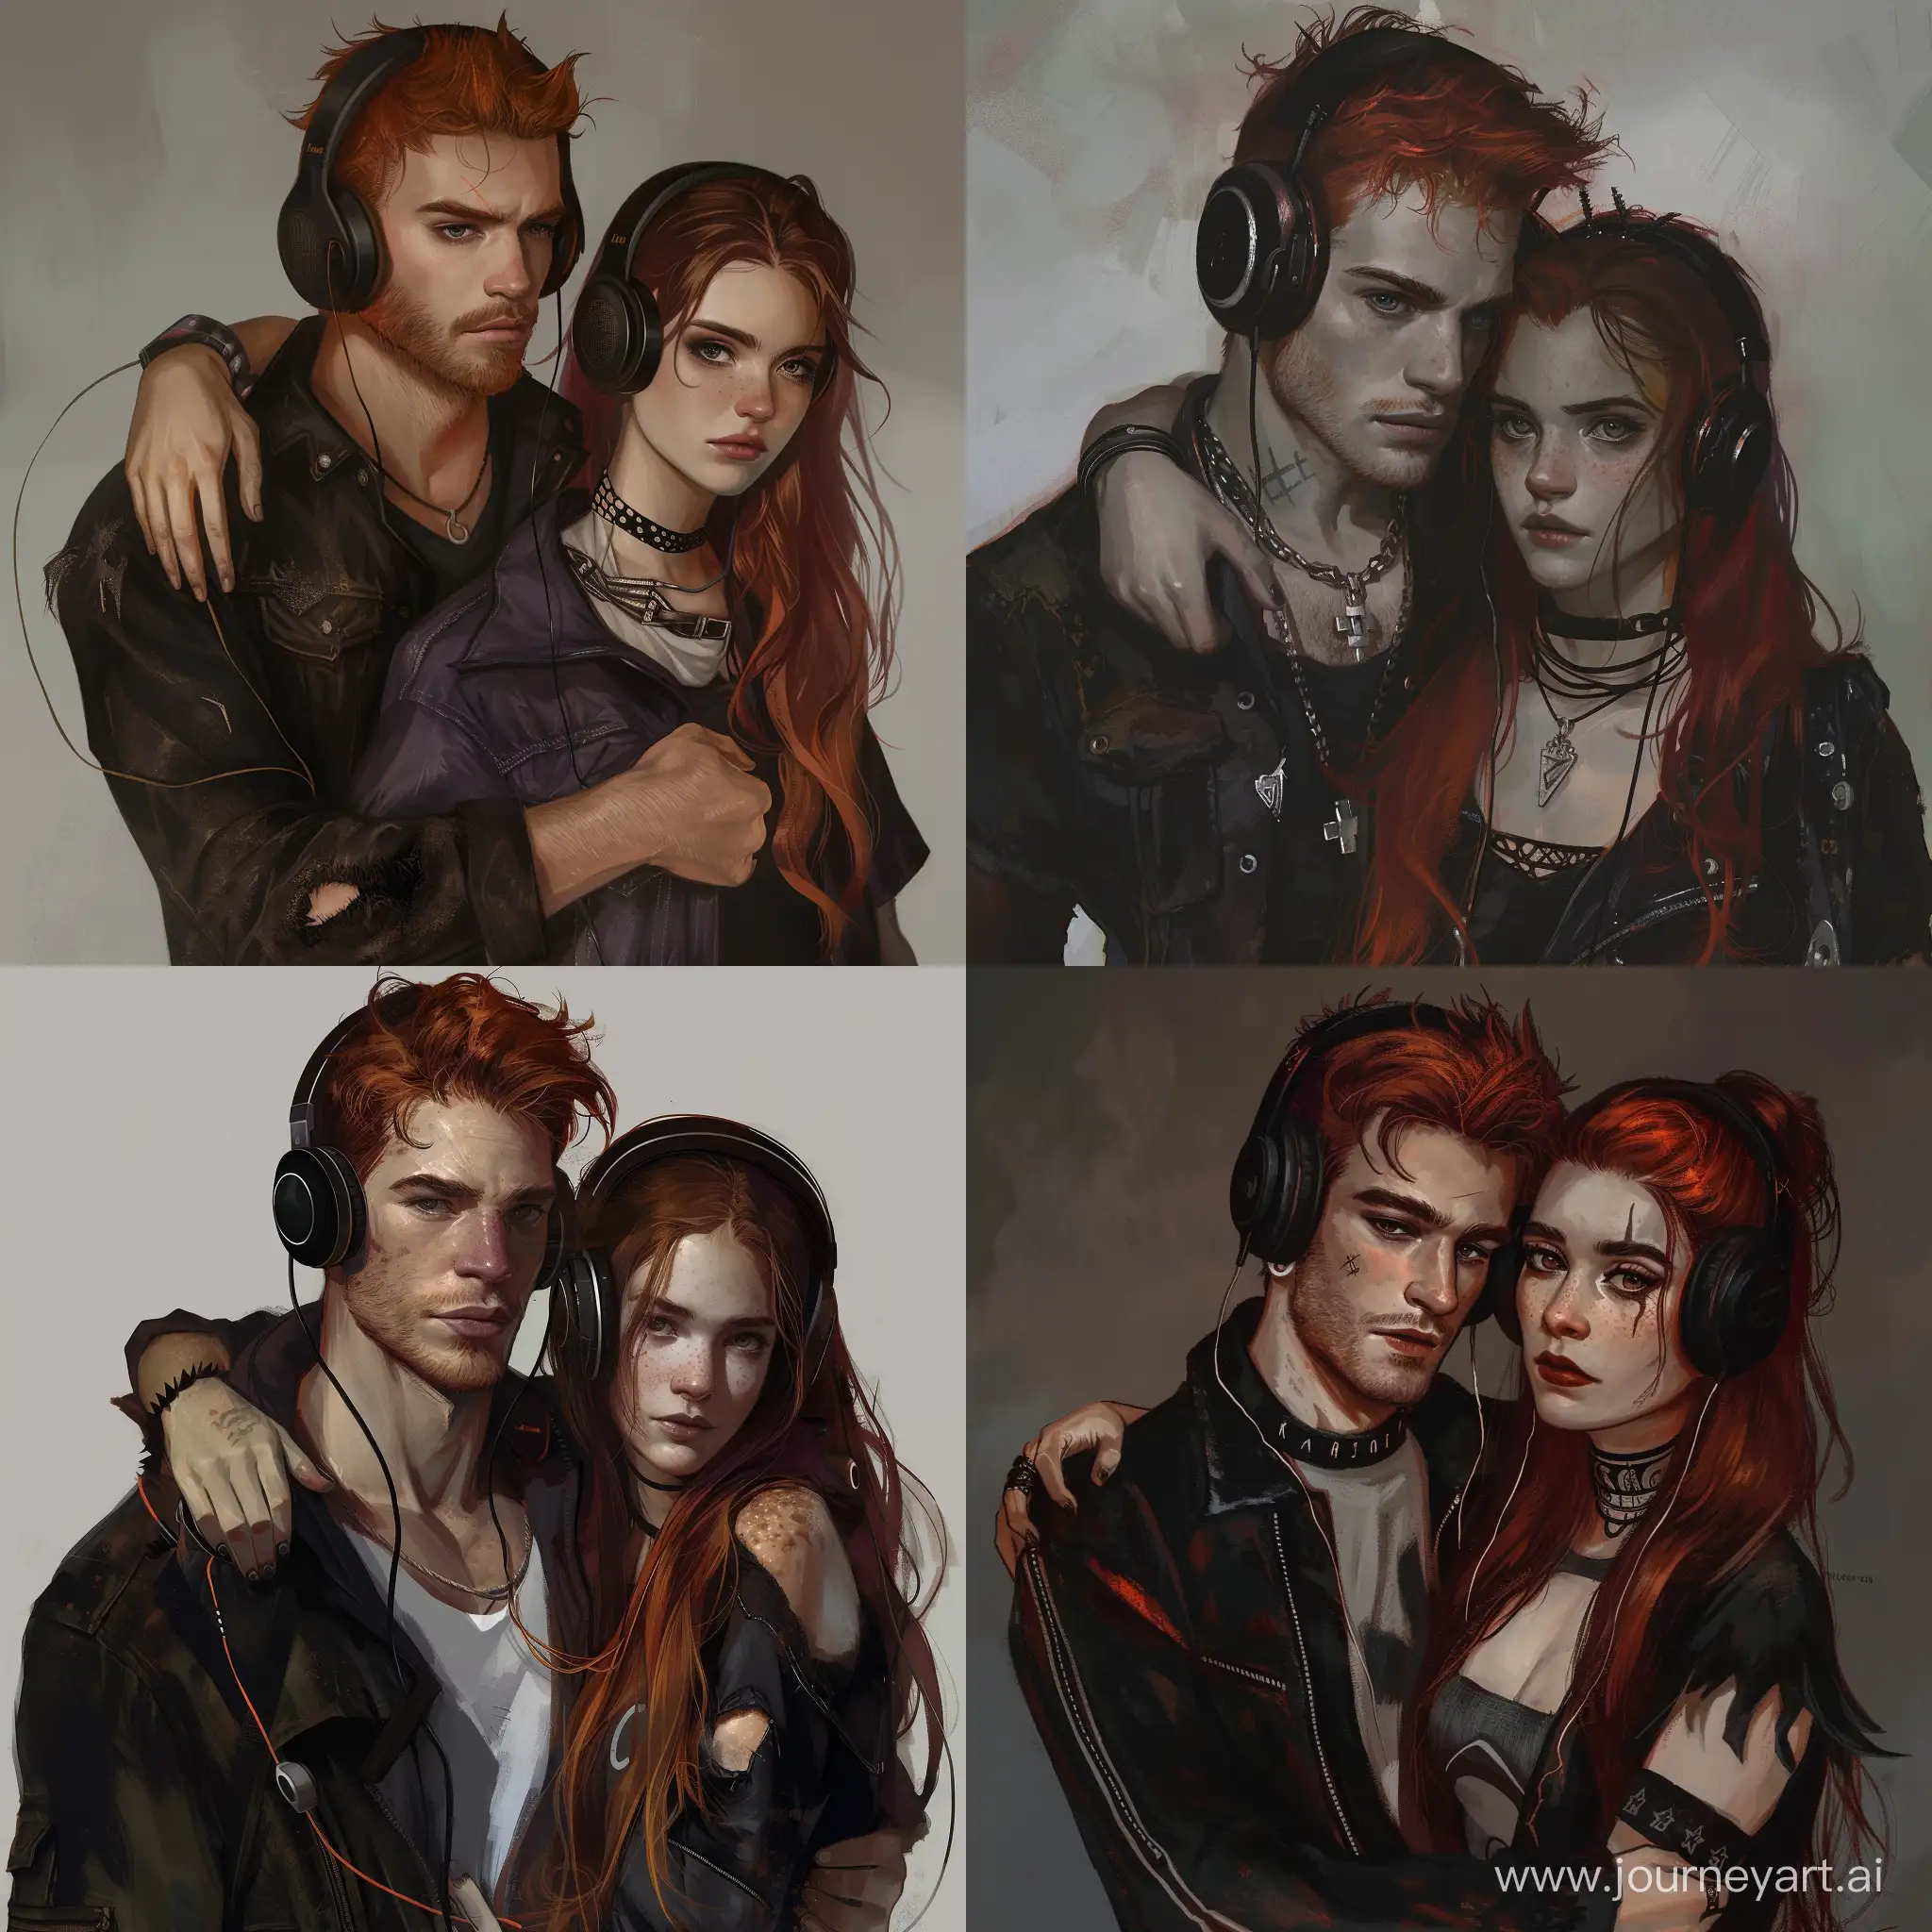 Intimate-Duet-Redhaired-Man-and-Auburnhaired-Goth-Girl-in-Elizabeth-Peyton-Style